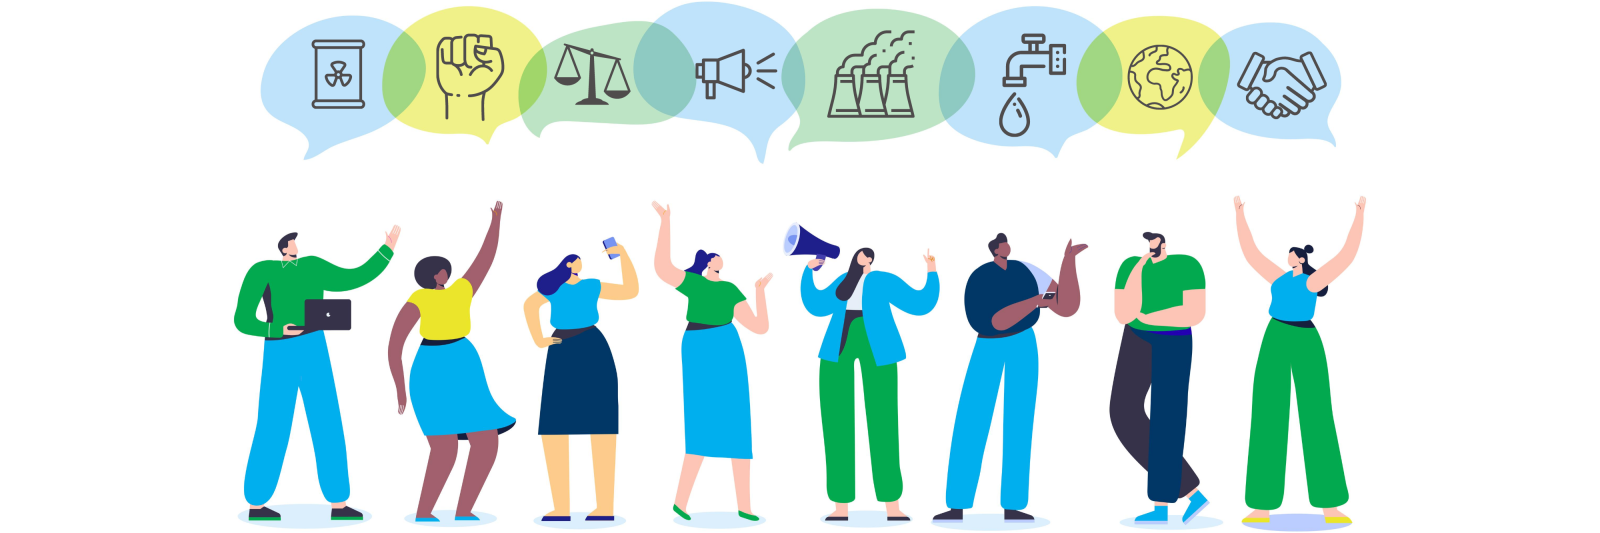 An illustration of eight people each with a speech bubble above their head. Inside the speech bubbles are icons representing the work of the environmental justice clinic: a can of toxic materials, a fist, a scale, a megaphone, a smokestack, a faucet with water coming out, a globe, and a handshake. 